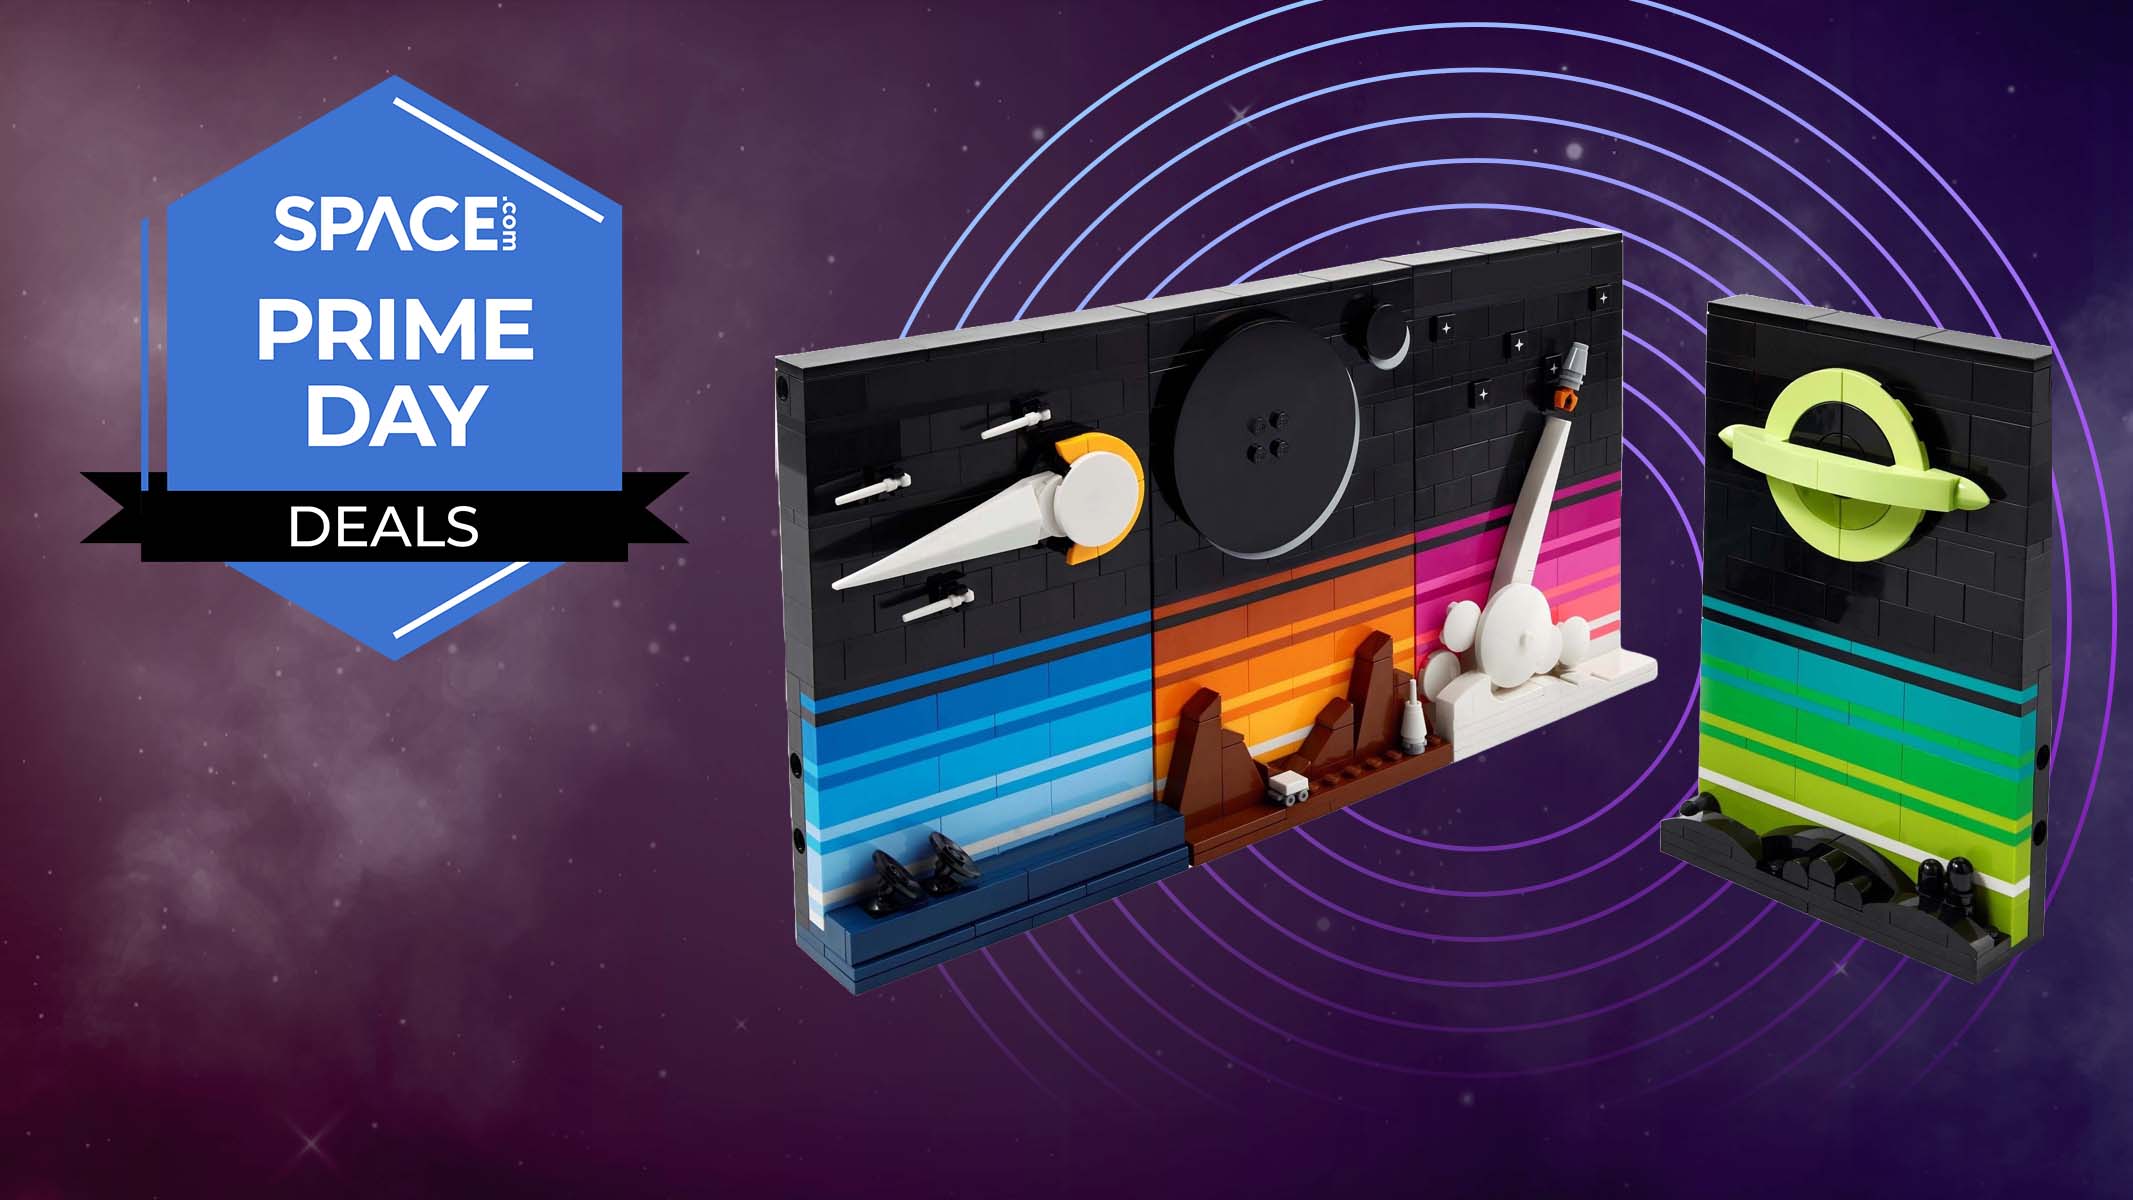  Save $30 on this magnificent Lego Ideas Tales of the Space Age lo-fi sci-fi set 